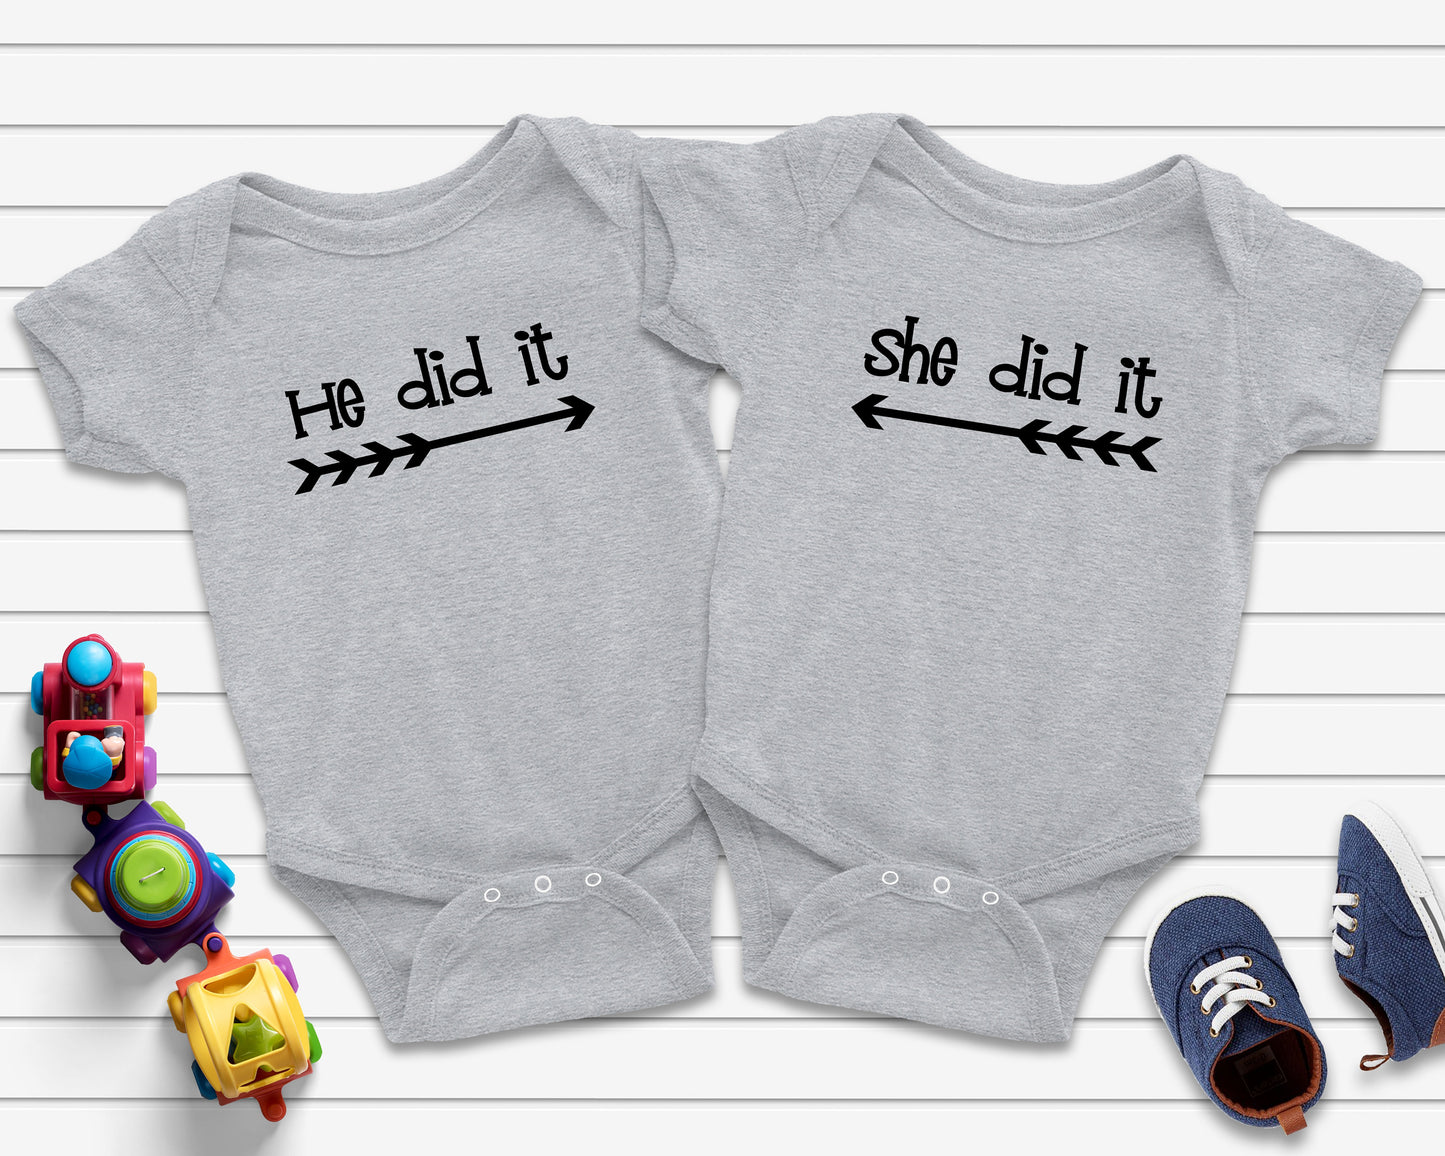 He Did It and She Did It T-Shirts or Bodysuits for Twins or Siblings - Boy Girl Twins - Fraternal Twins - Brother and Sister Tees